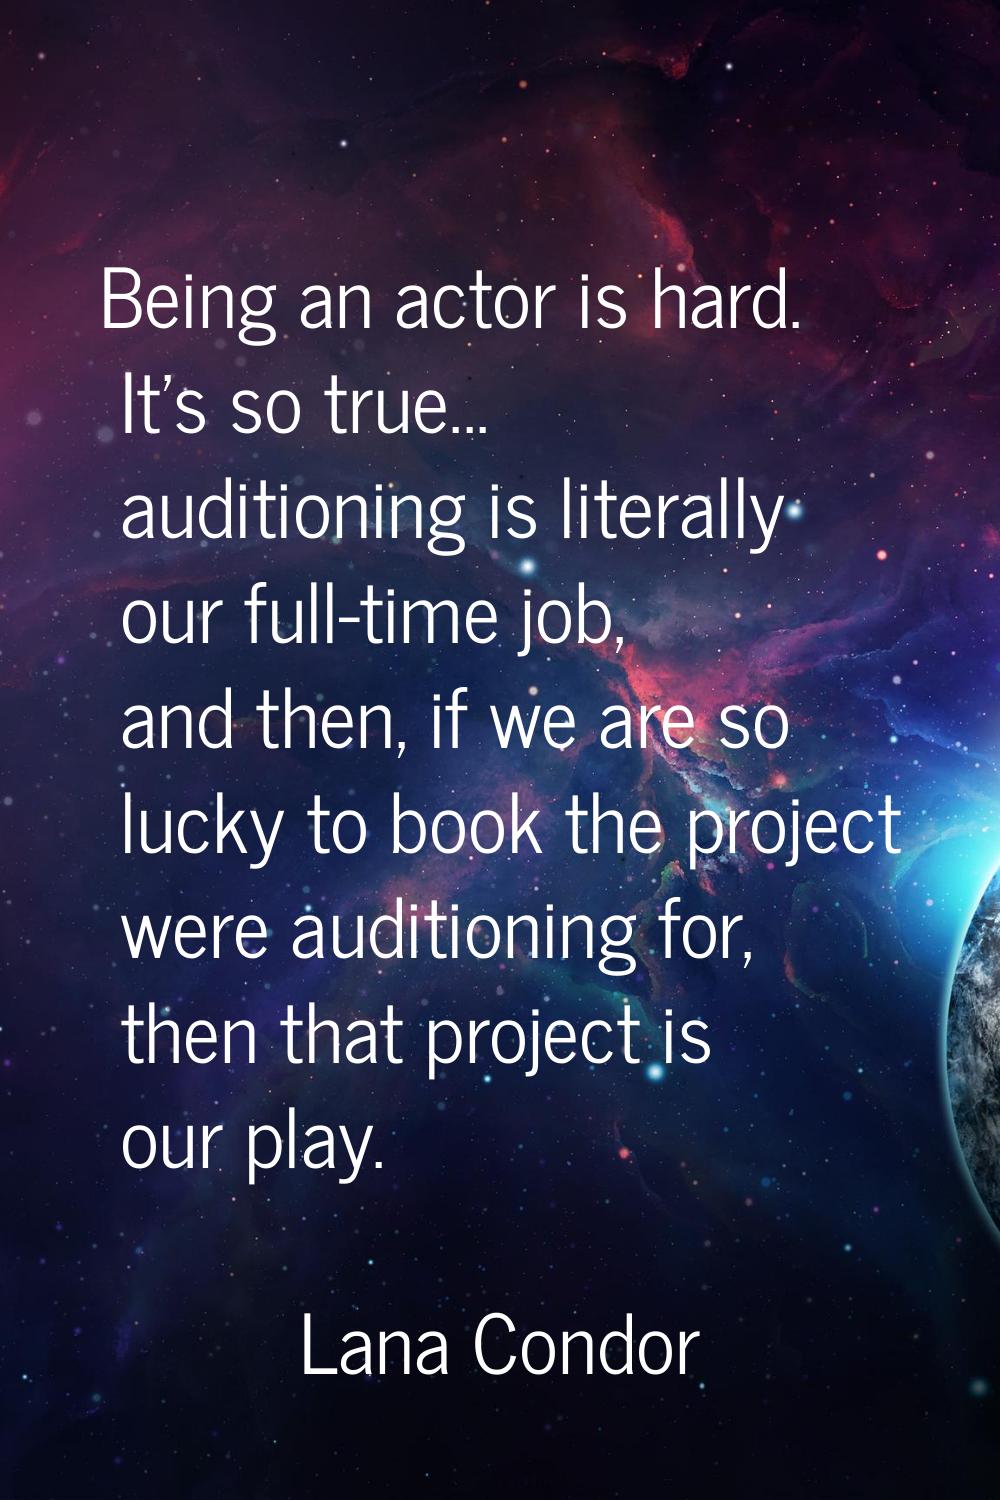 Being an actor is hard. It's so true... auditioning is literally our full-time job, and then, if we